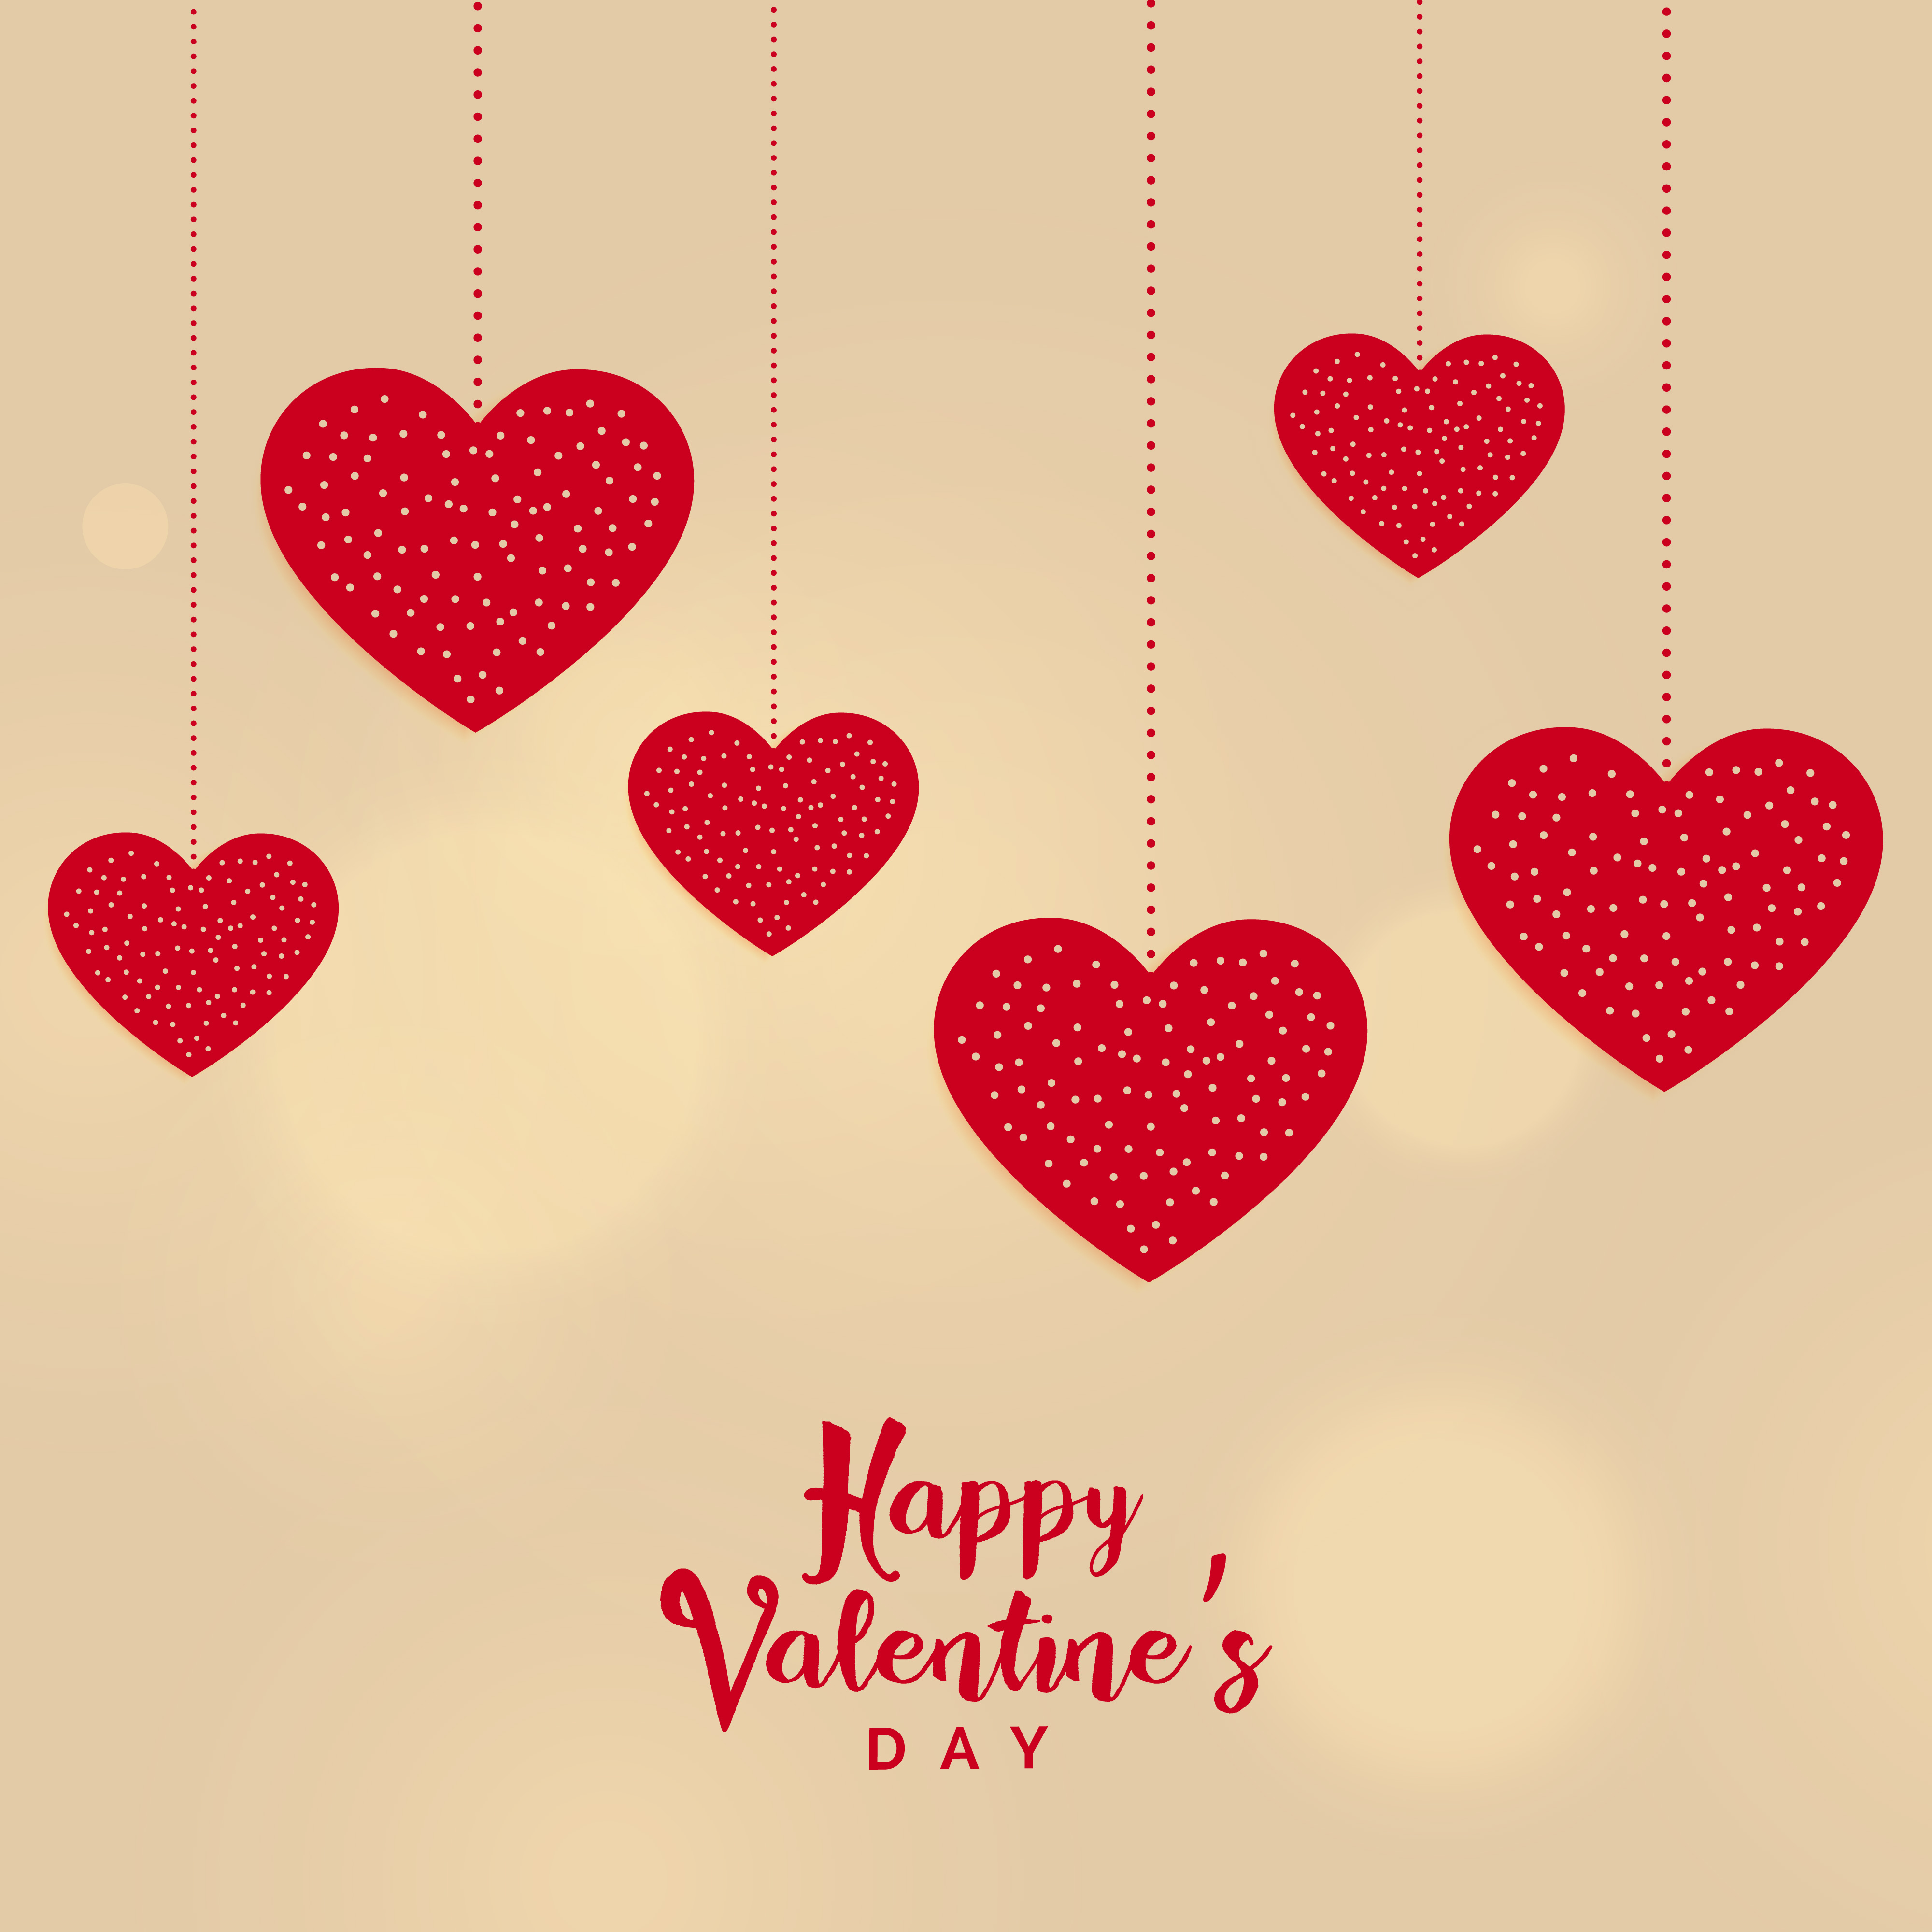 happy valentine's day hanging hearts background - Download Free Vector Art, Stock ...